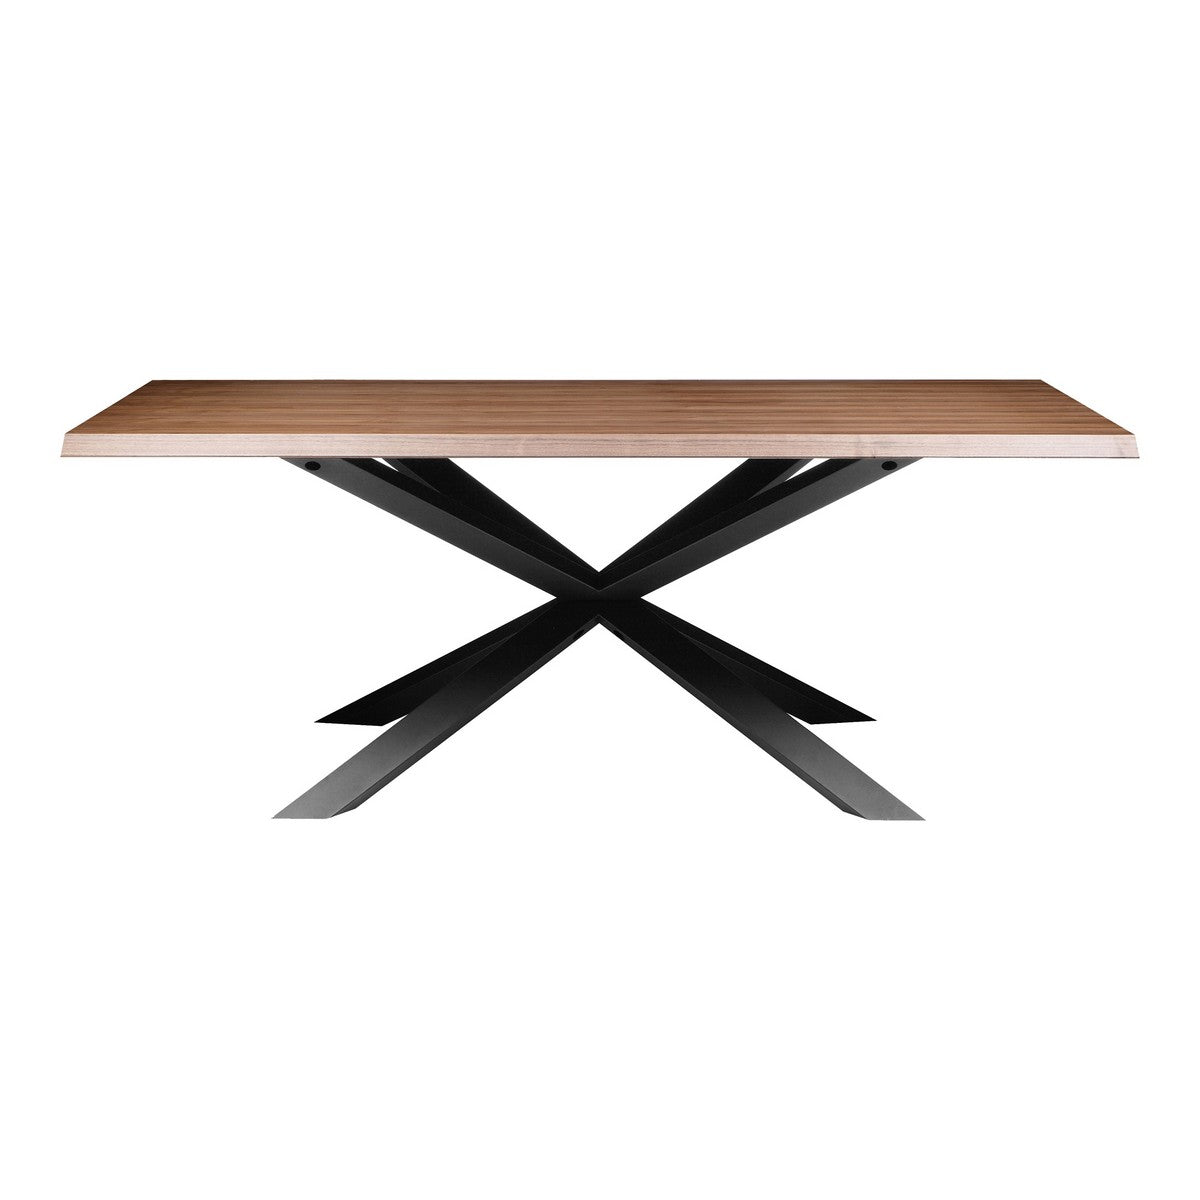 Moe's Home Collection Oslo Dining Table Walnut - ER-1174-20 - Moe's Home Collection - Dining Tables - Minimal And Modern - 1